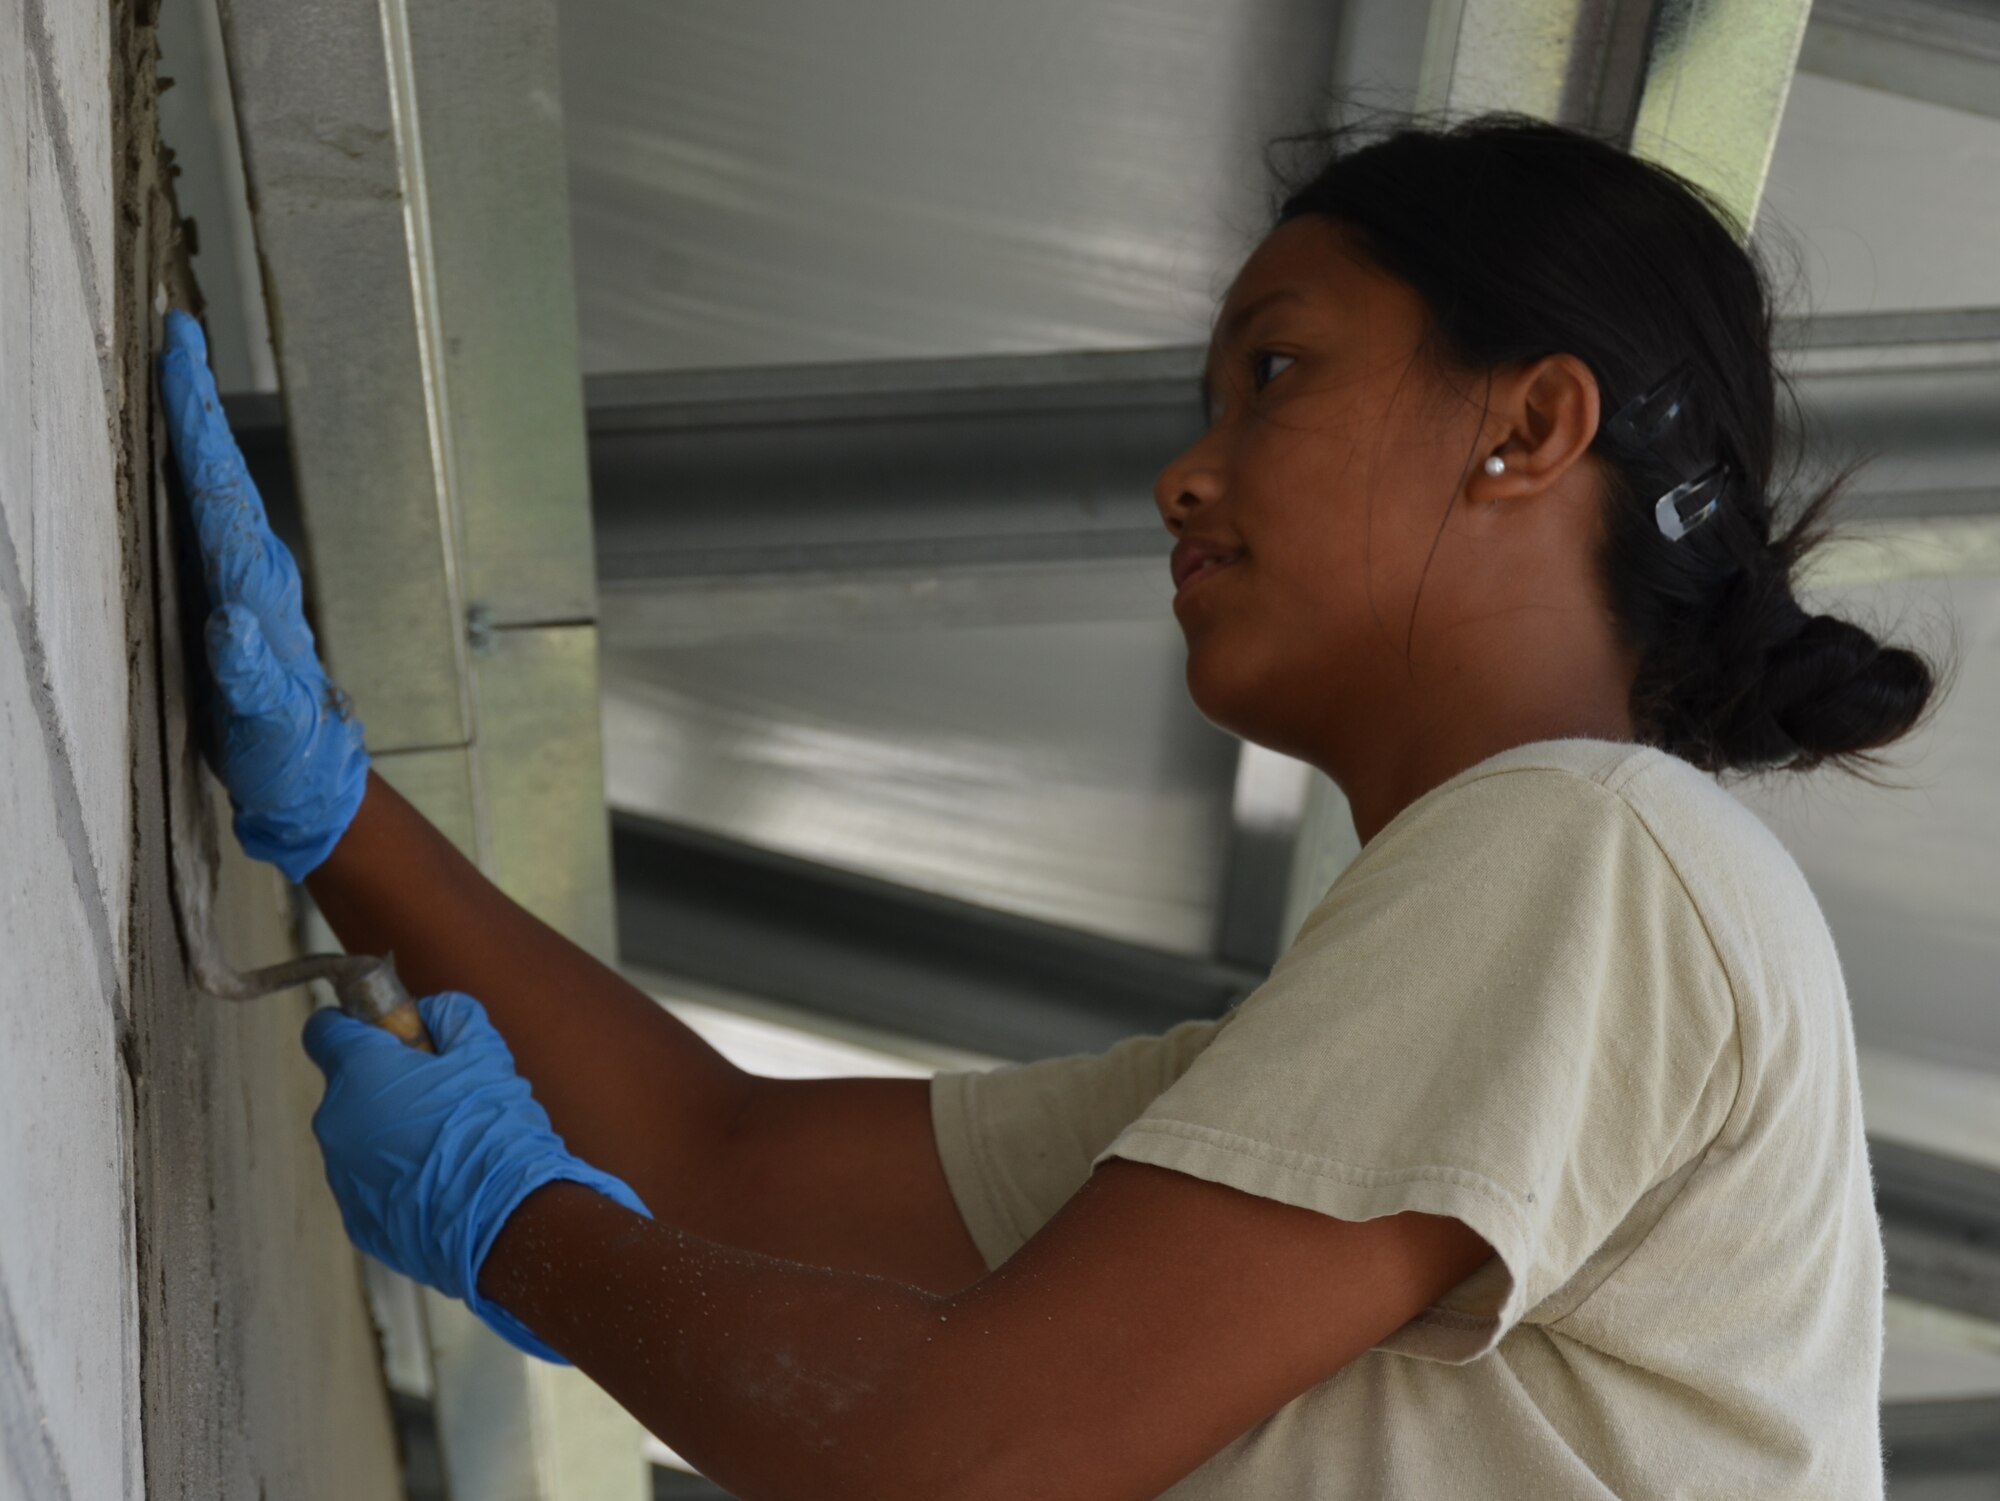 Senior Airman Janna Harina, an emergency medical technician deployed from the 4th Medical Operations Squadron, Seymour-Johnson Air Force Base, N.C., parges an exterior wall at the Sadie Vernon Technical High School in Belize City, Belize, May 15, 2014. Harina is deployed in support of the U.S. Southern Command-sponsored New Horizons exercise.